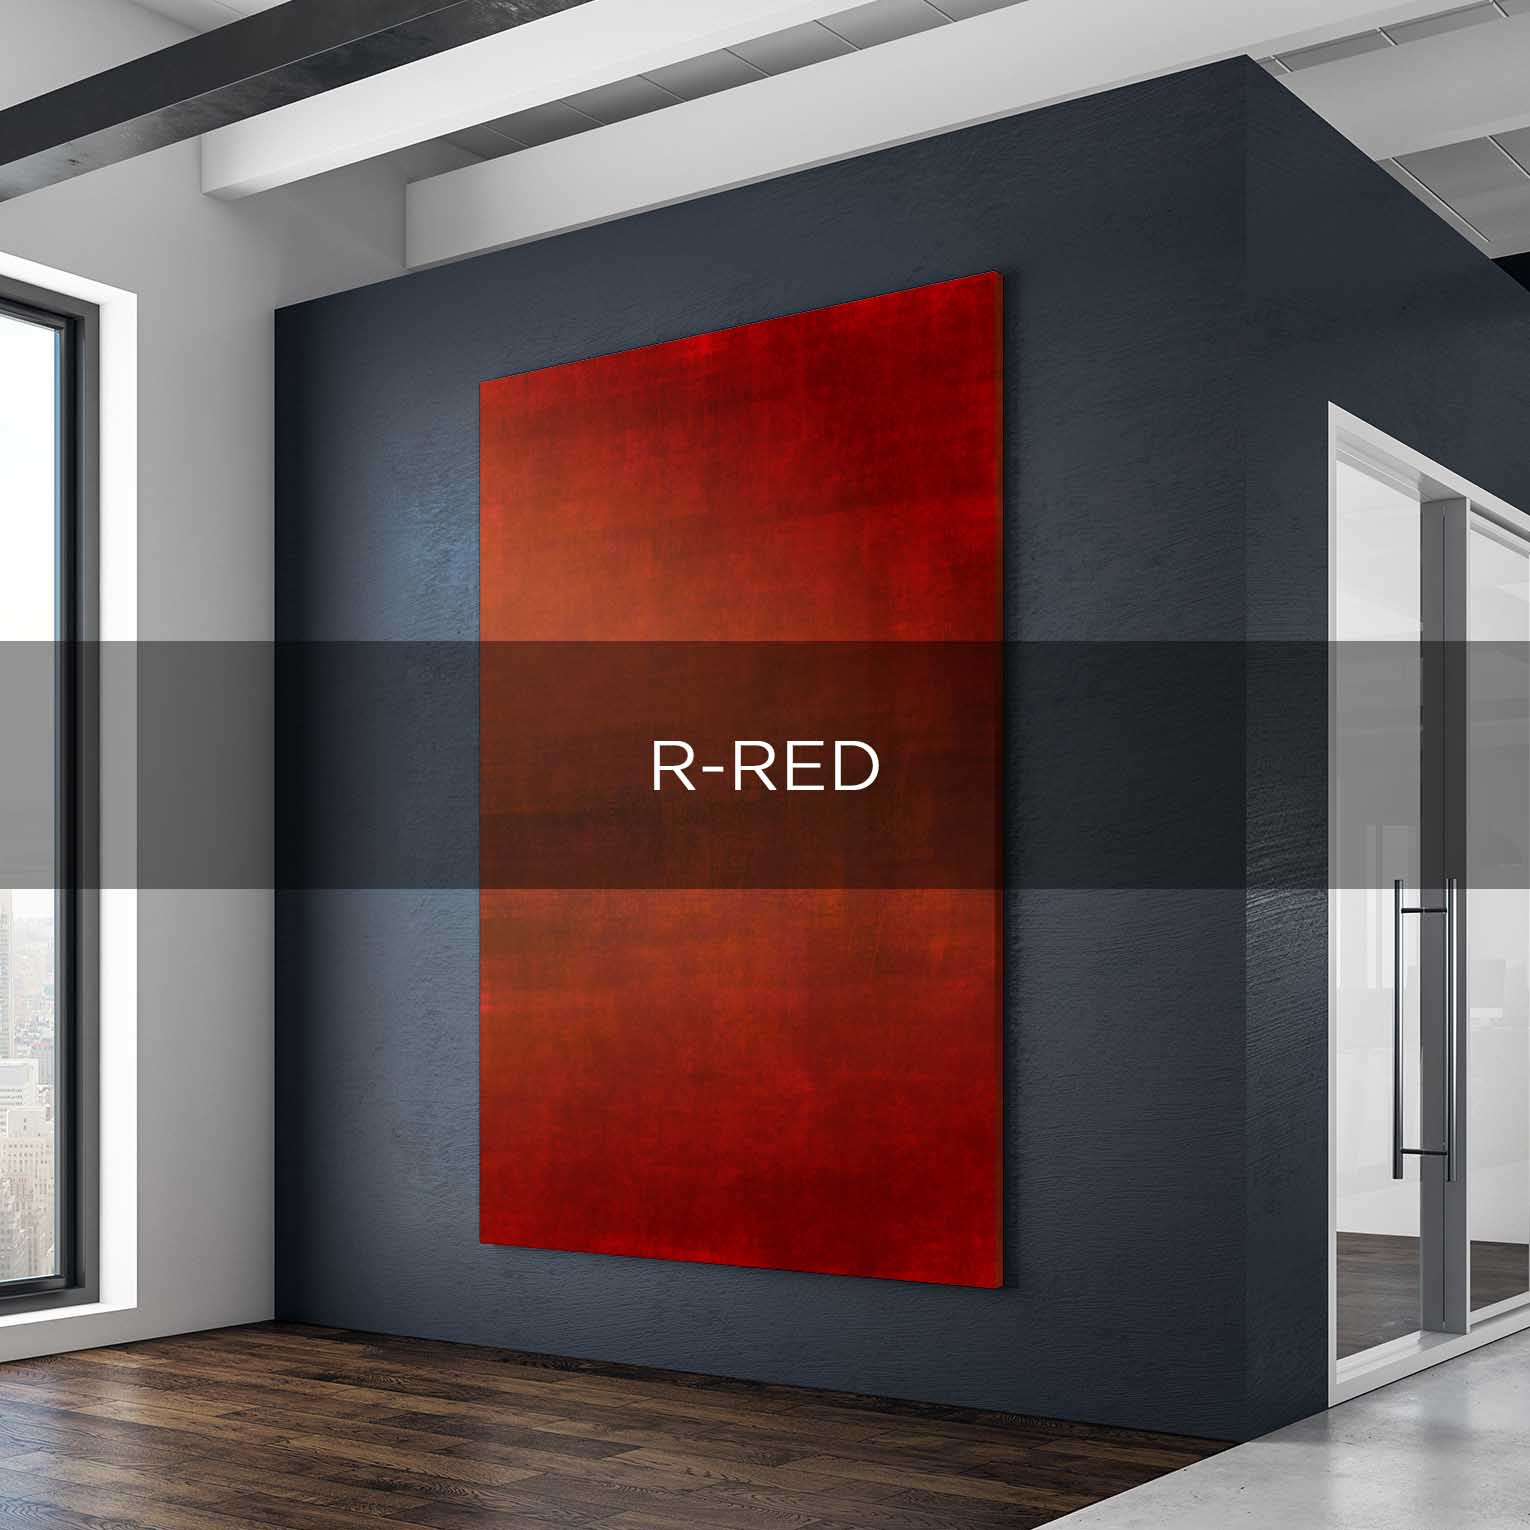 R-RED